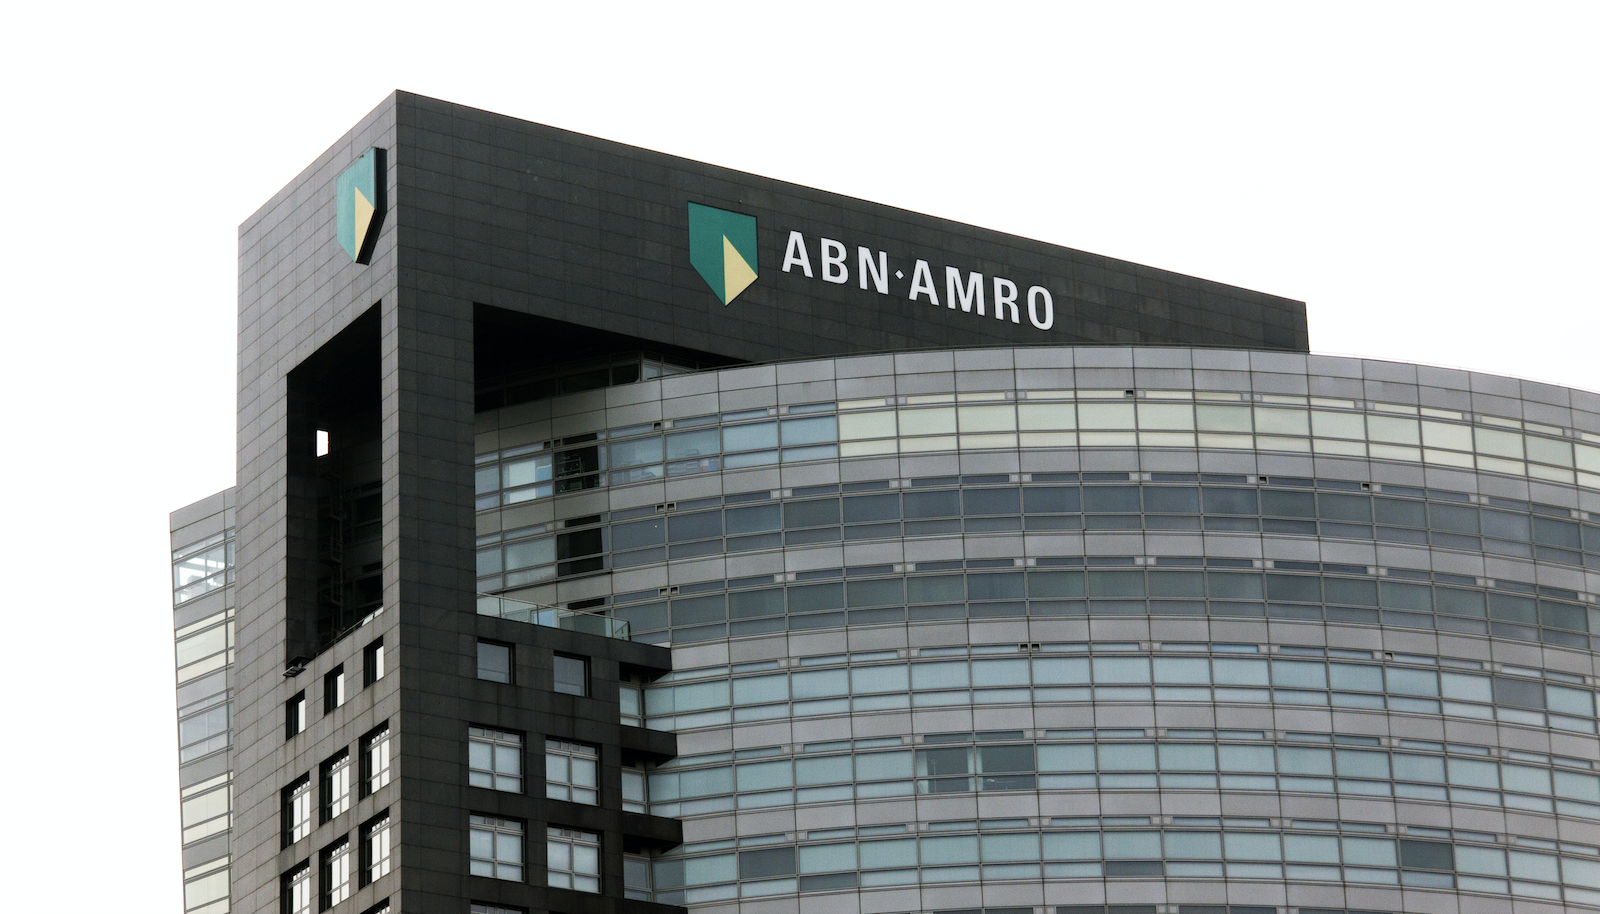 Oil prices and COVID-19 blamed as ABN Amro retreats to core business ...